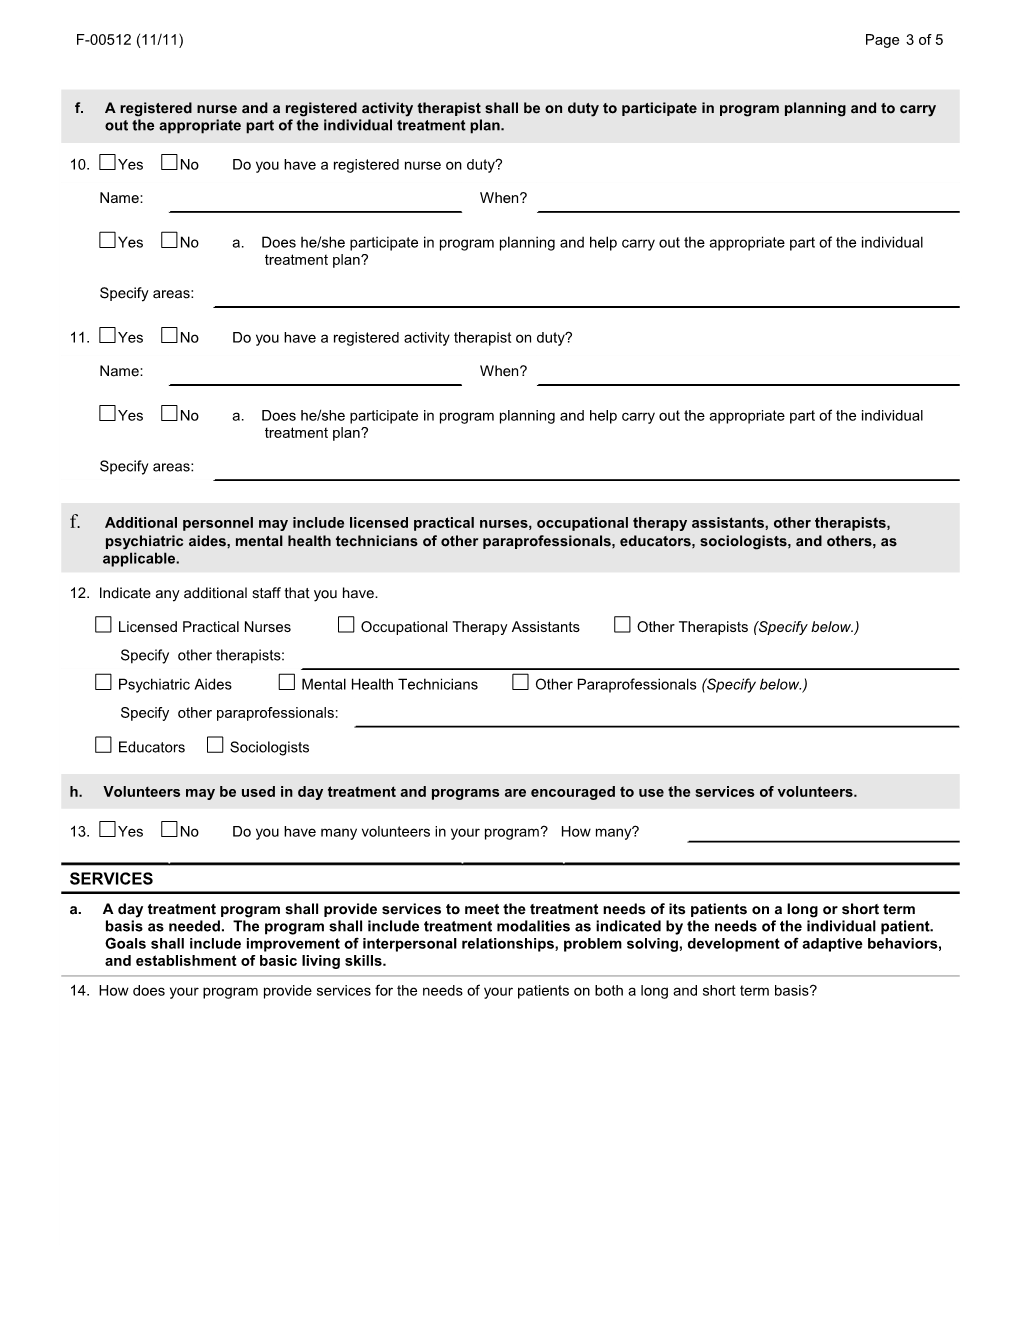 Mental Health Day Treatment Program Initial Certification Application - DHS 61.75, F-00512